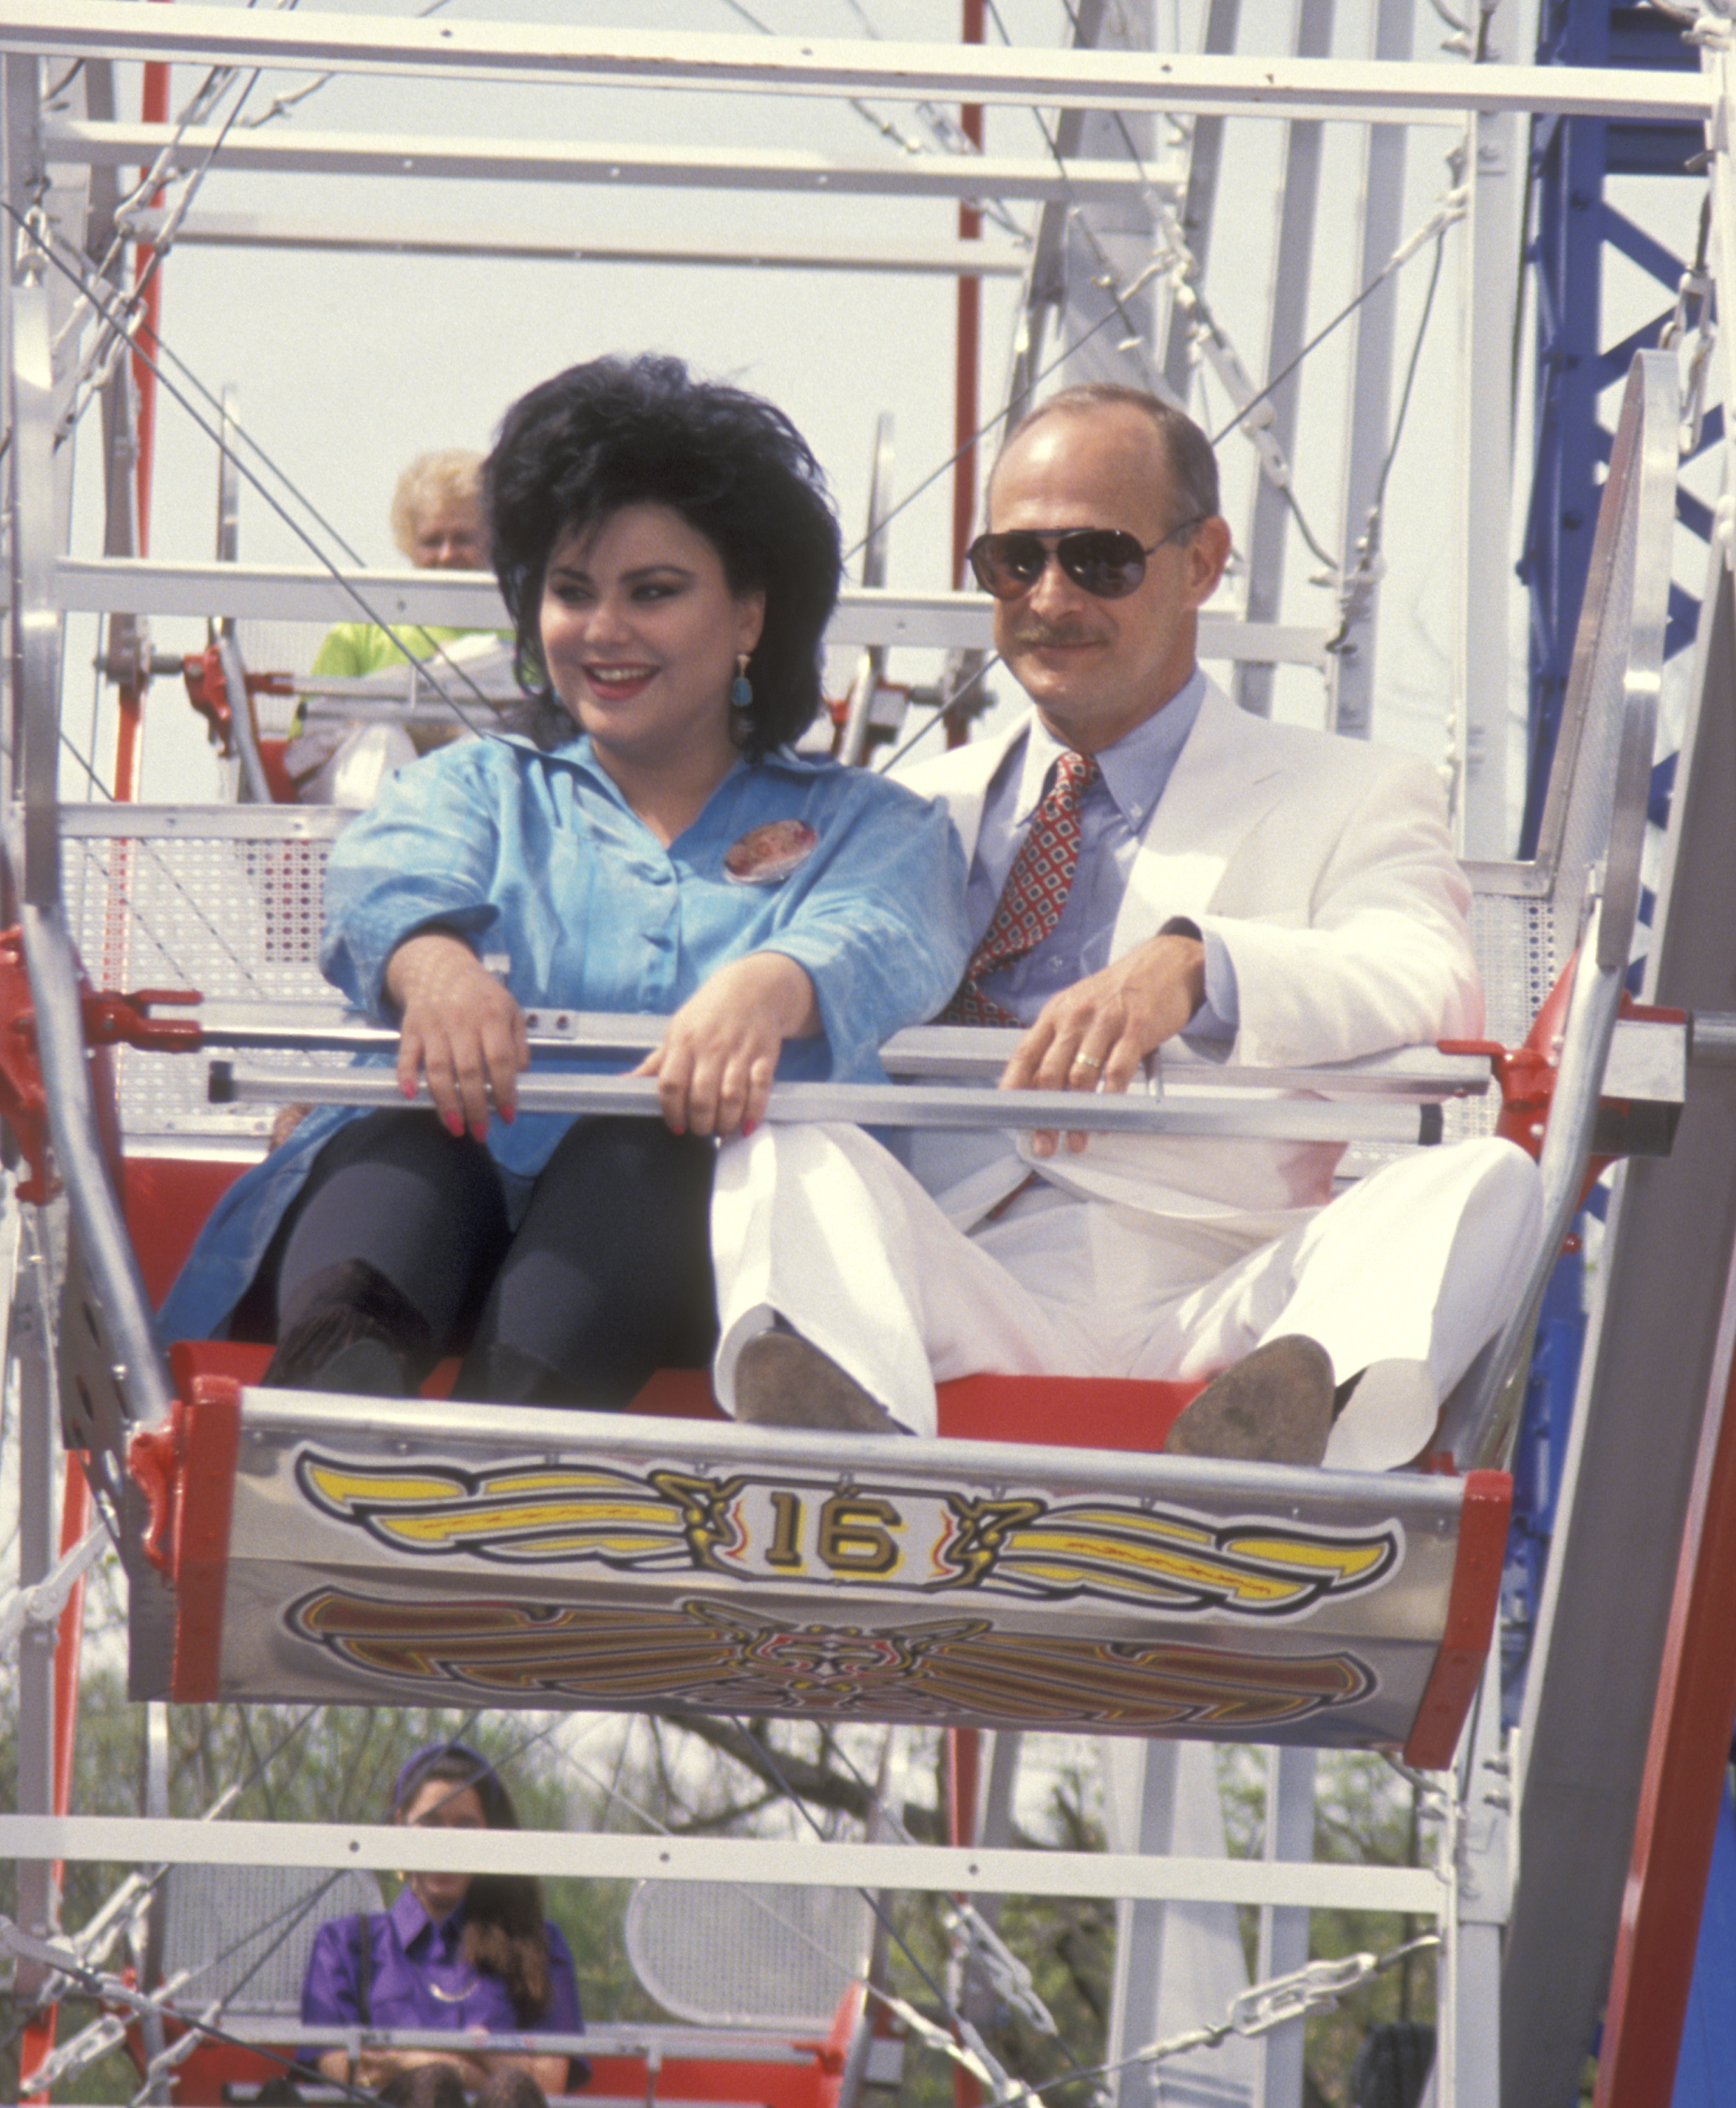 Delta Burke and Gerald McRaney at the grand opening weekend of Dollywood in Pigeon Forge on April 24, 1993 | Source: Getty Images